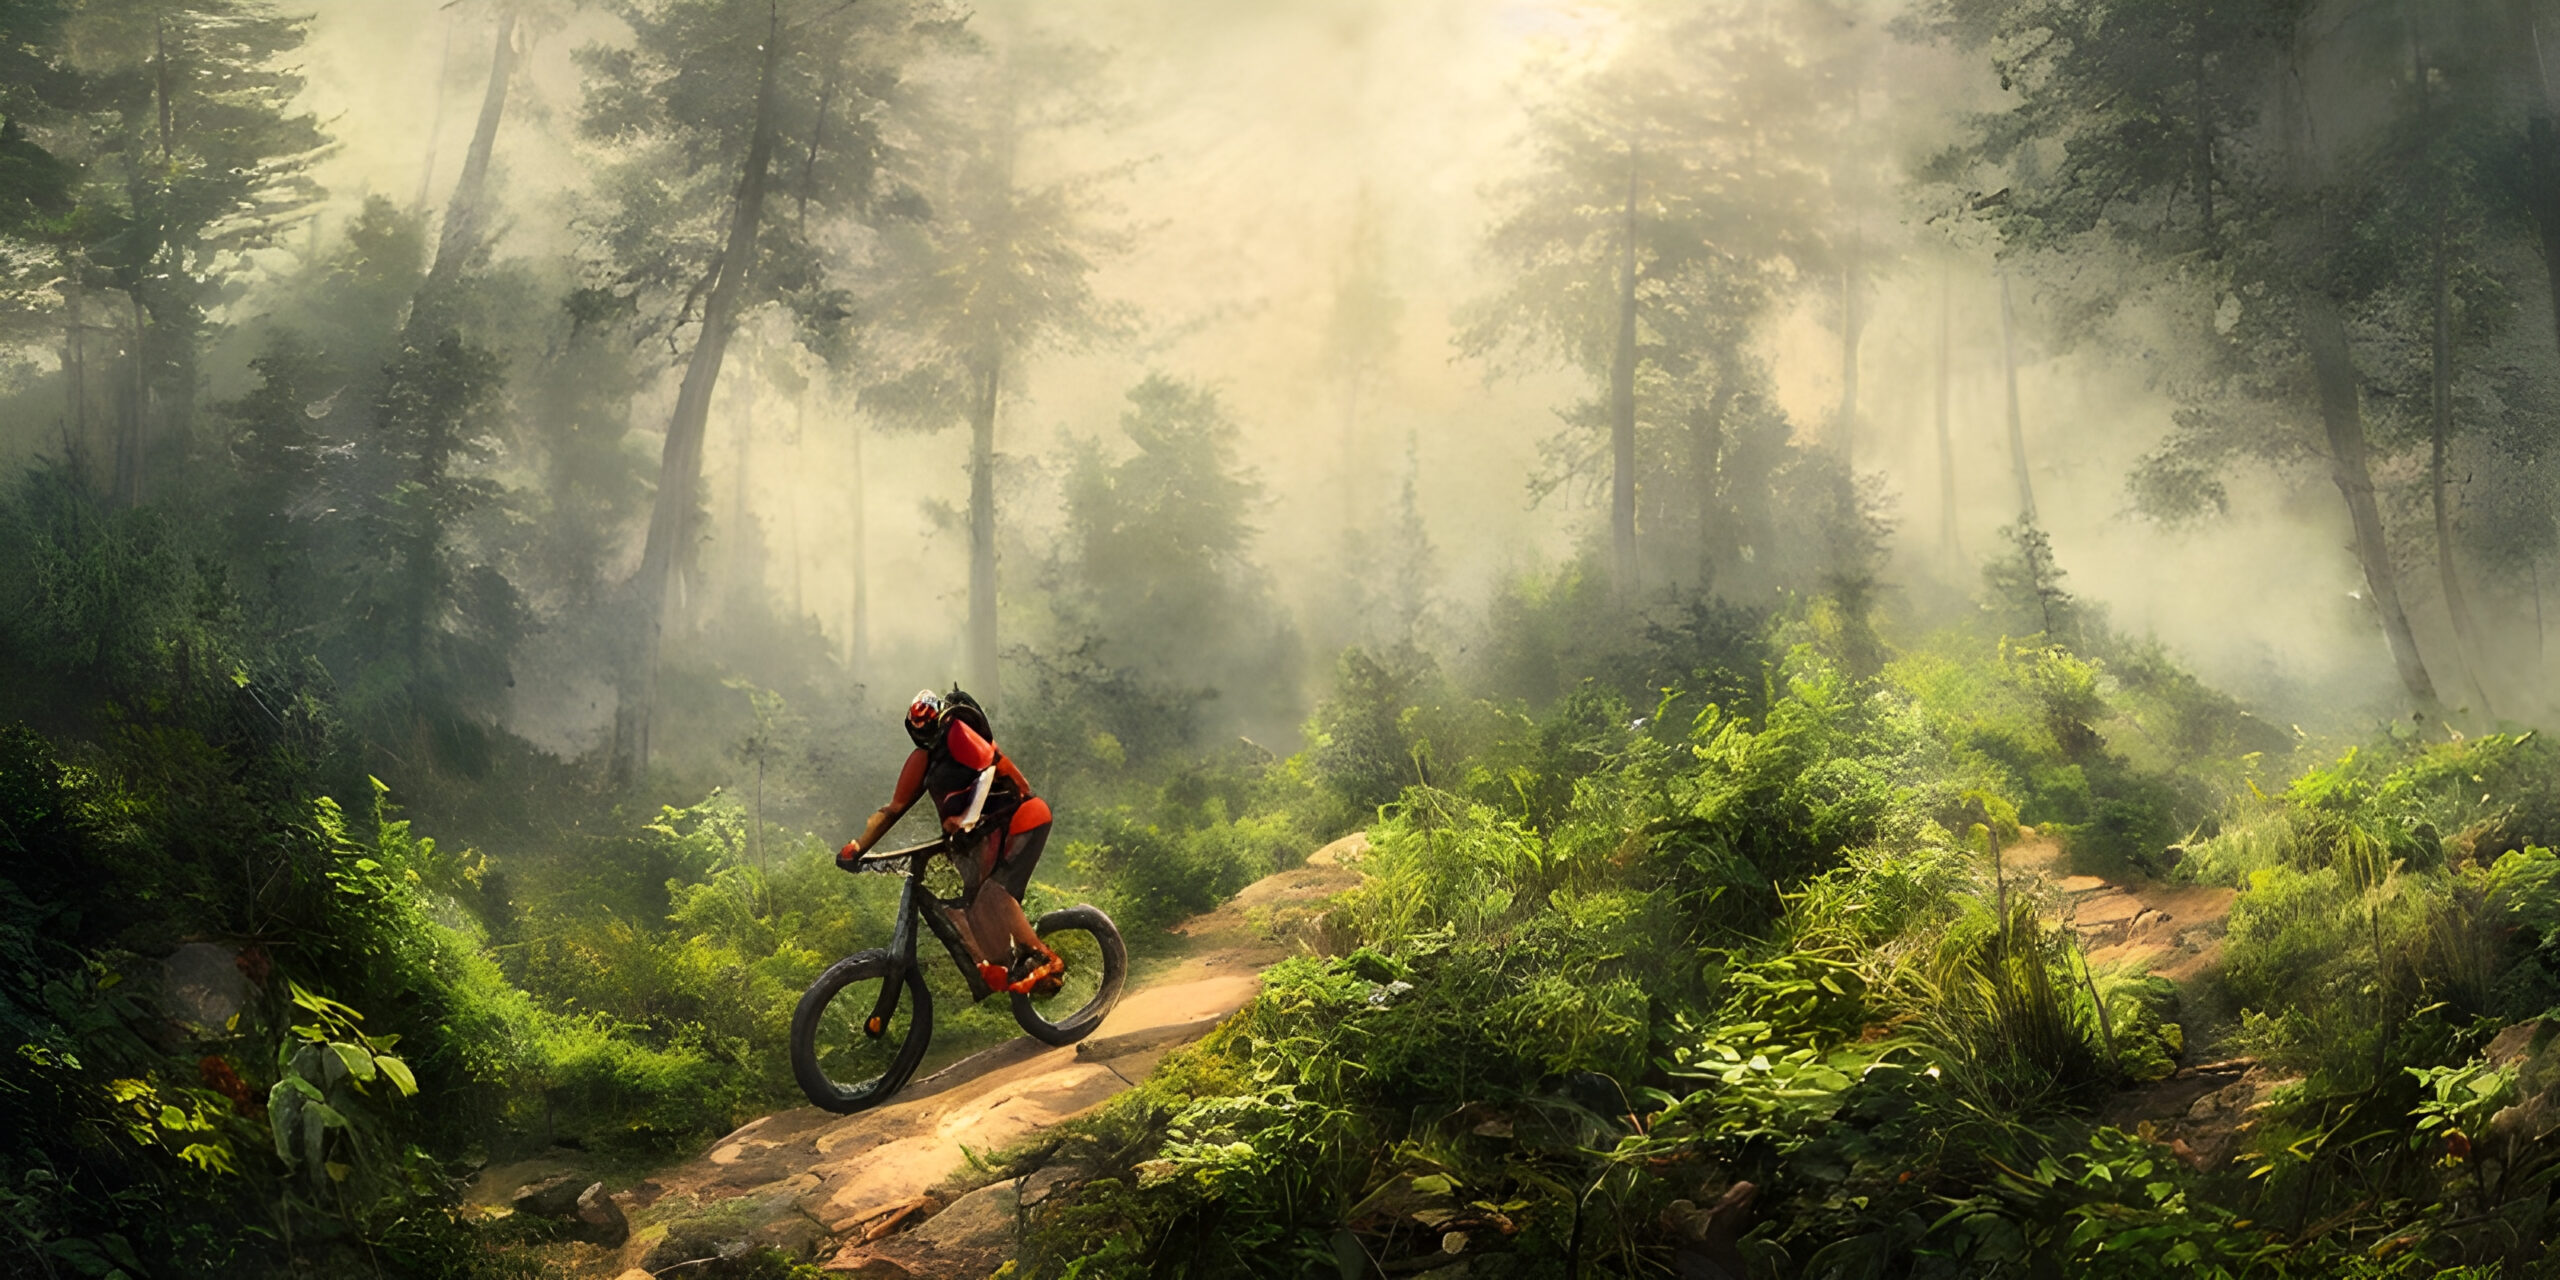 Ride the Trails: 10 Epic Mountain Bike Adventures to Experience the Great Outdoors